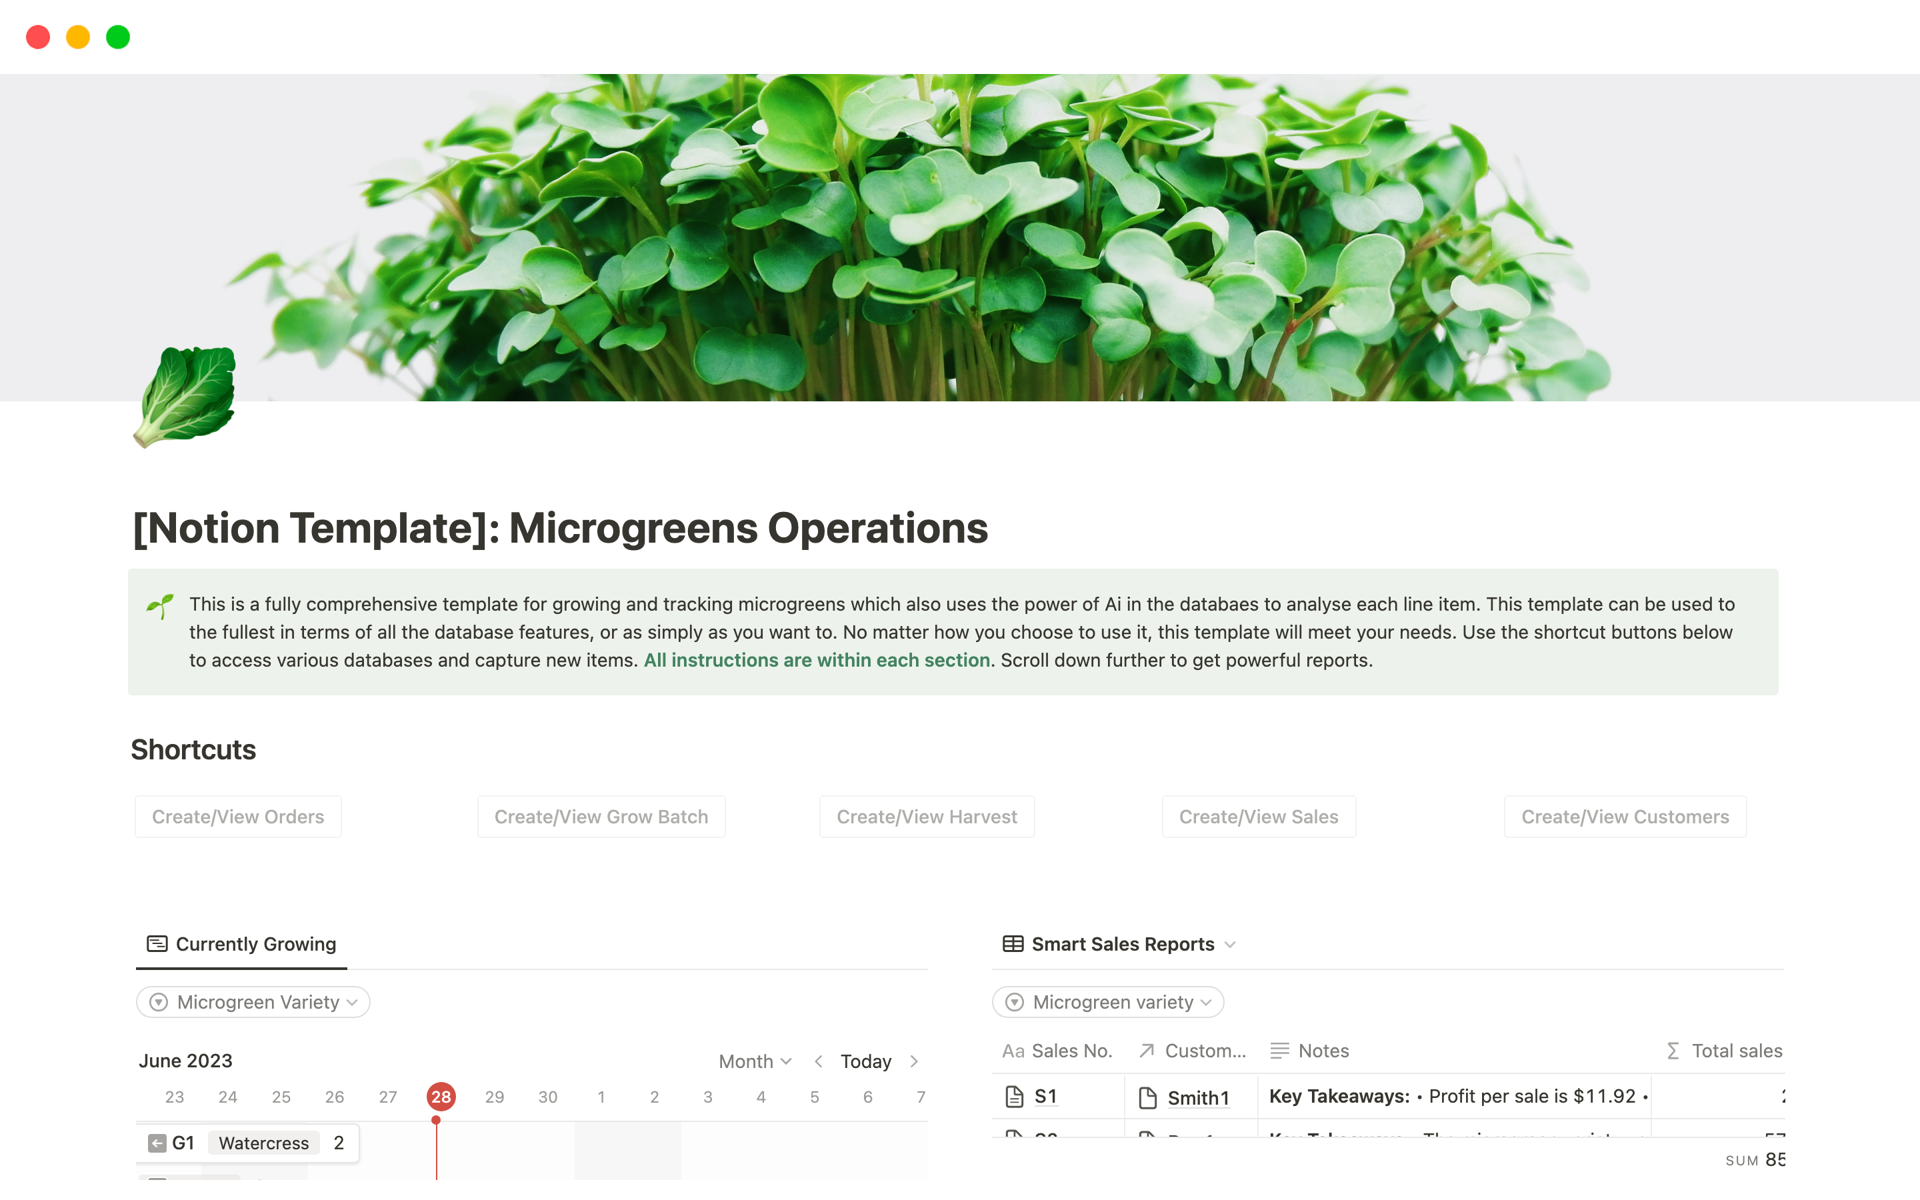 This template is the ideal tool to manage and analyse all your microgreens operation and functions